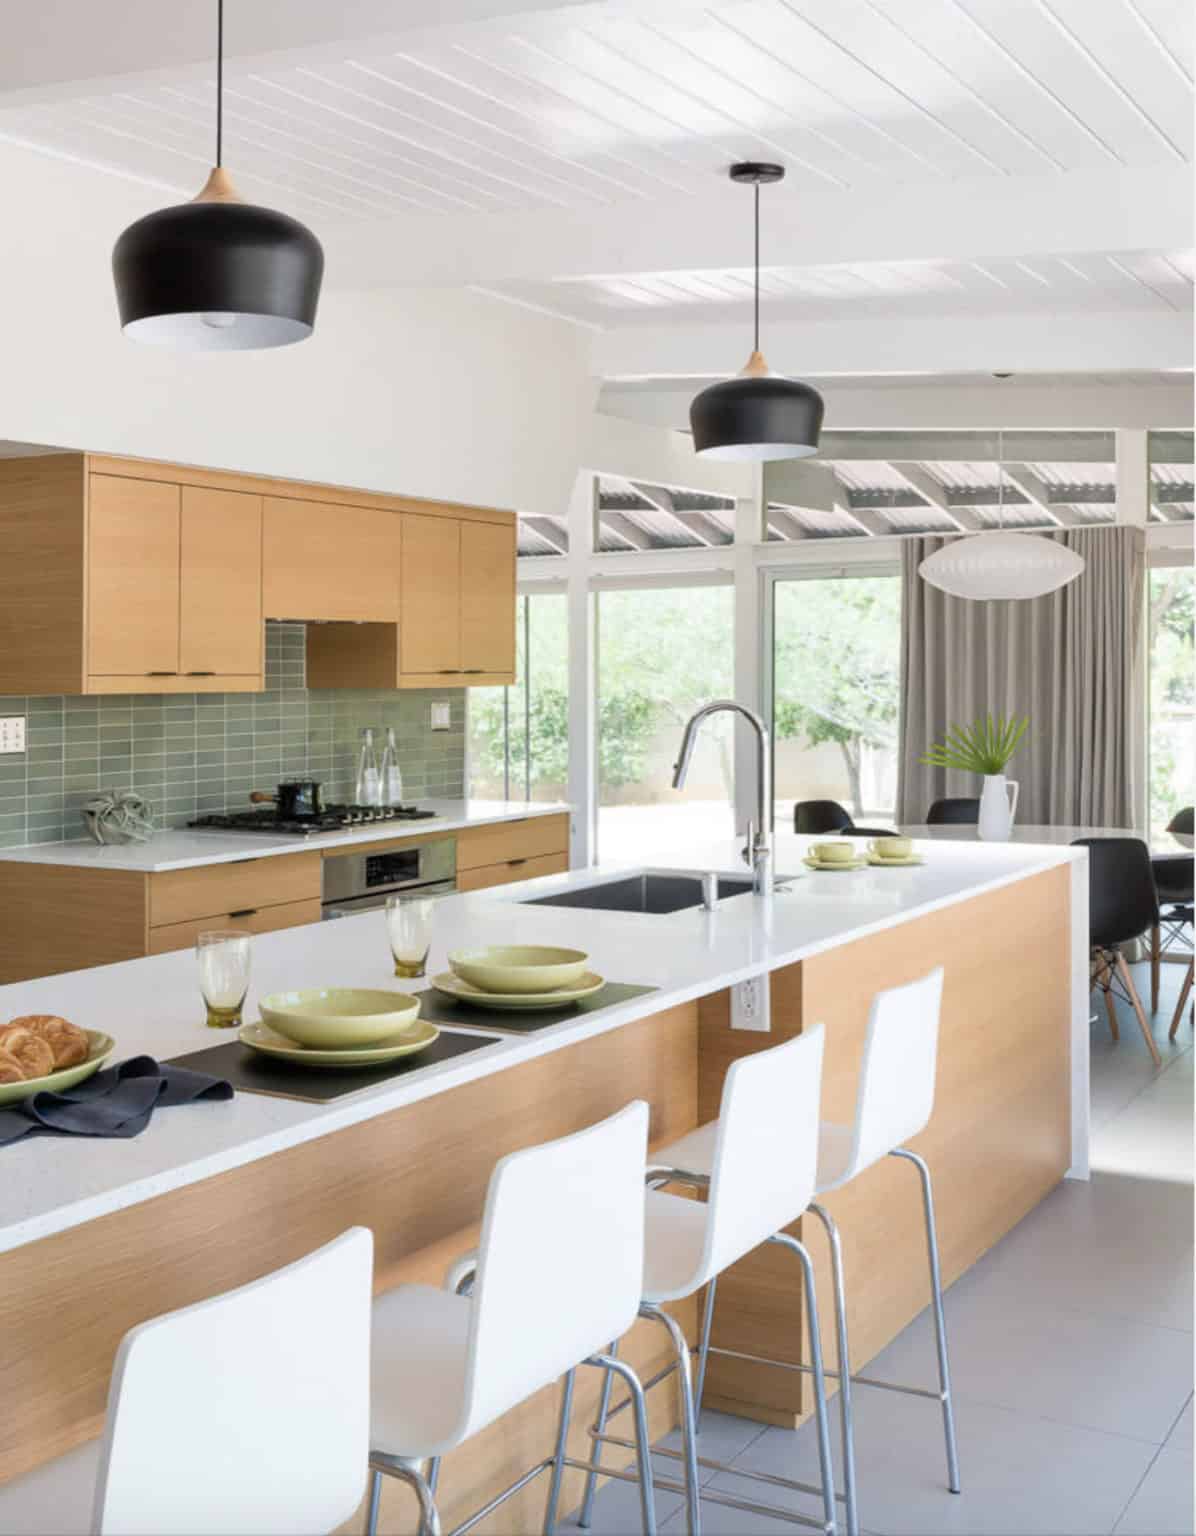 25 Incredible Midcentury Modern Kitchens to Delight the Senses